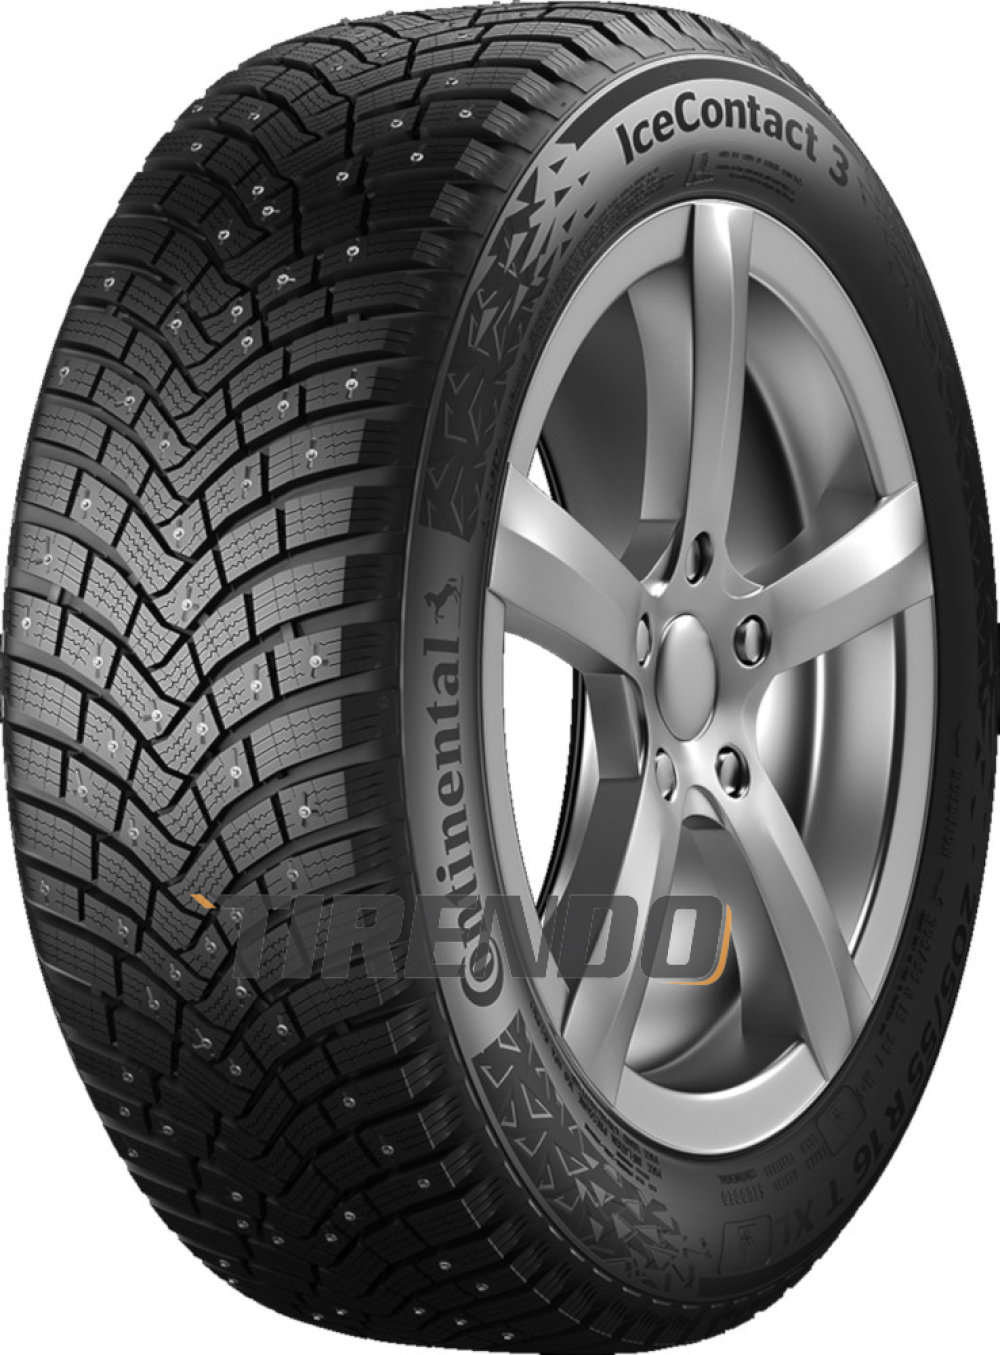 Image of Continental IceContact 3 ( 205/55 R16 94T XL Conti Seal, pneumatico chiodato )